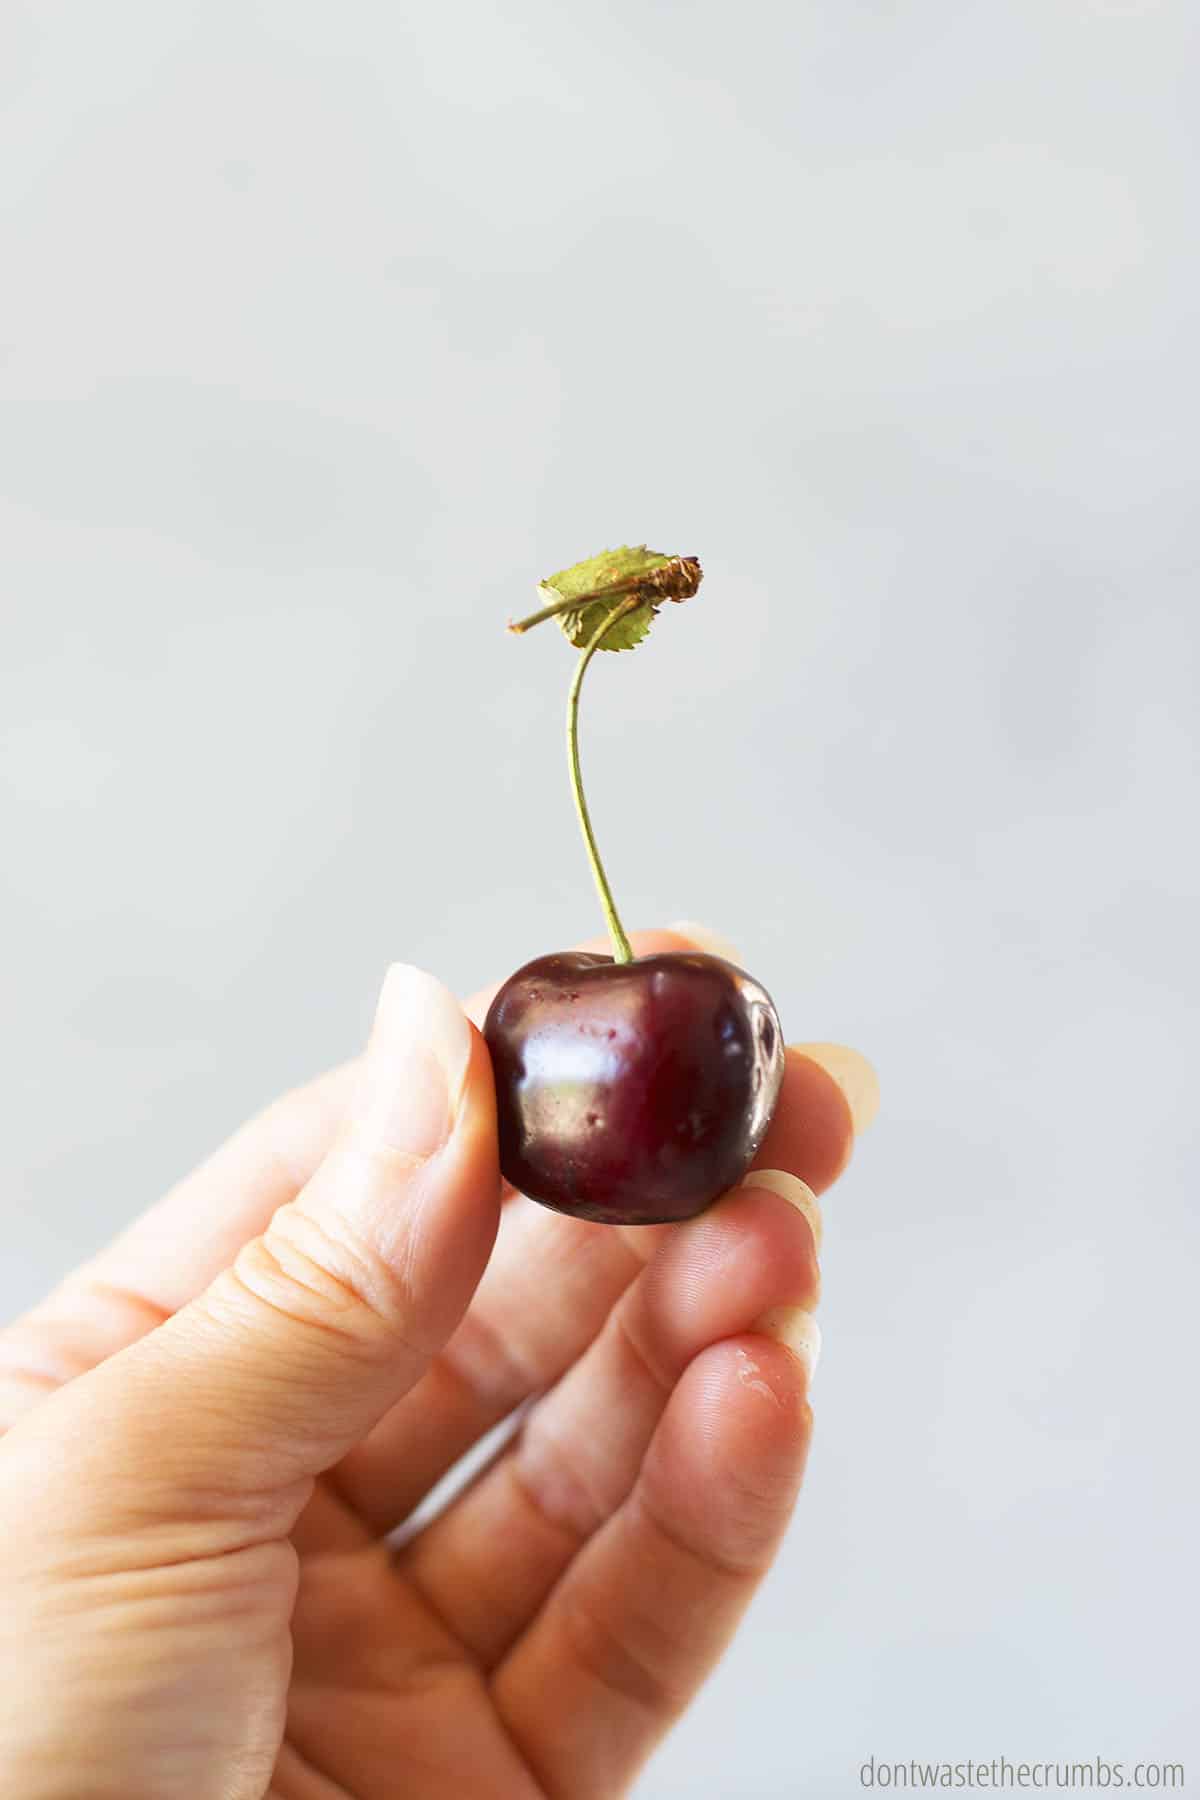 Hand holding a cherry